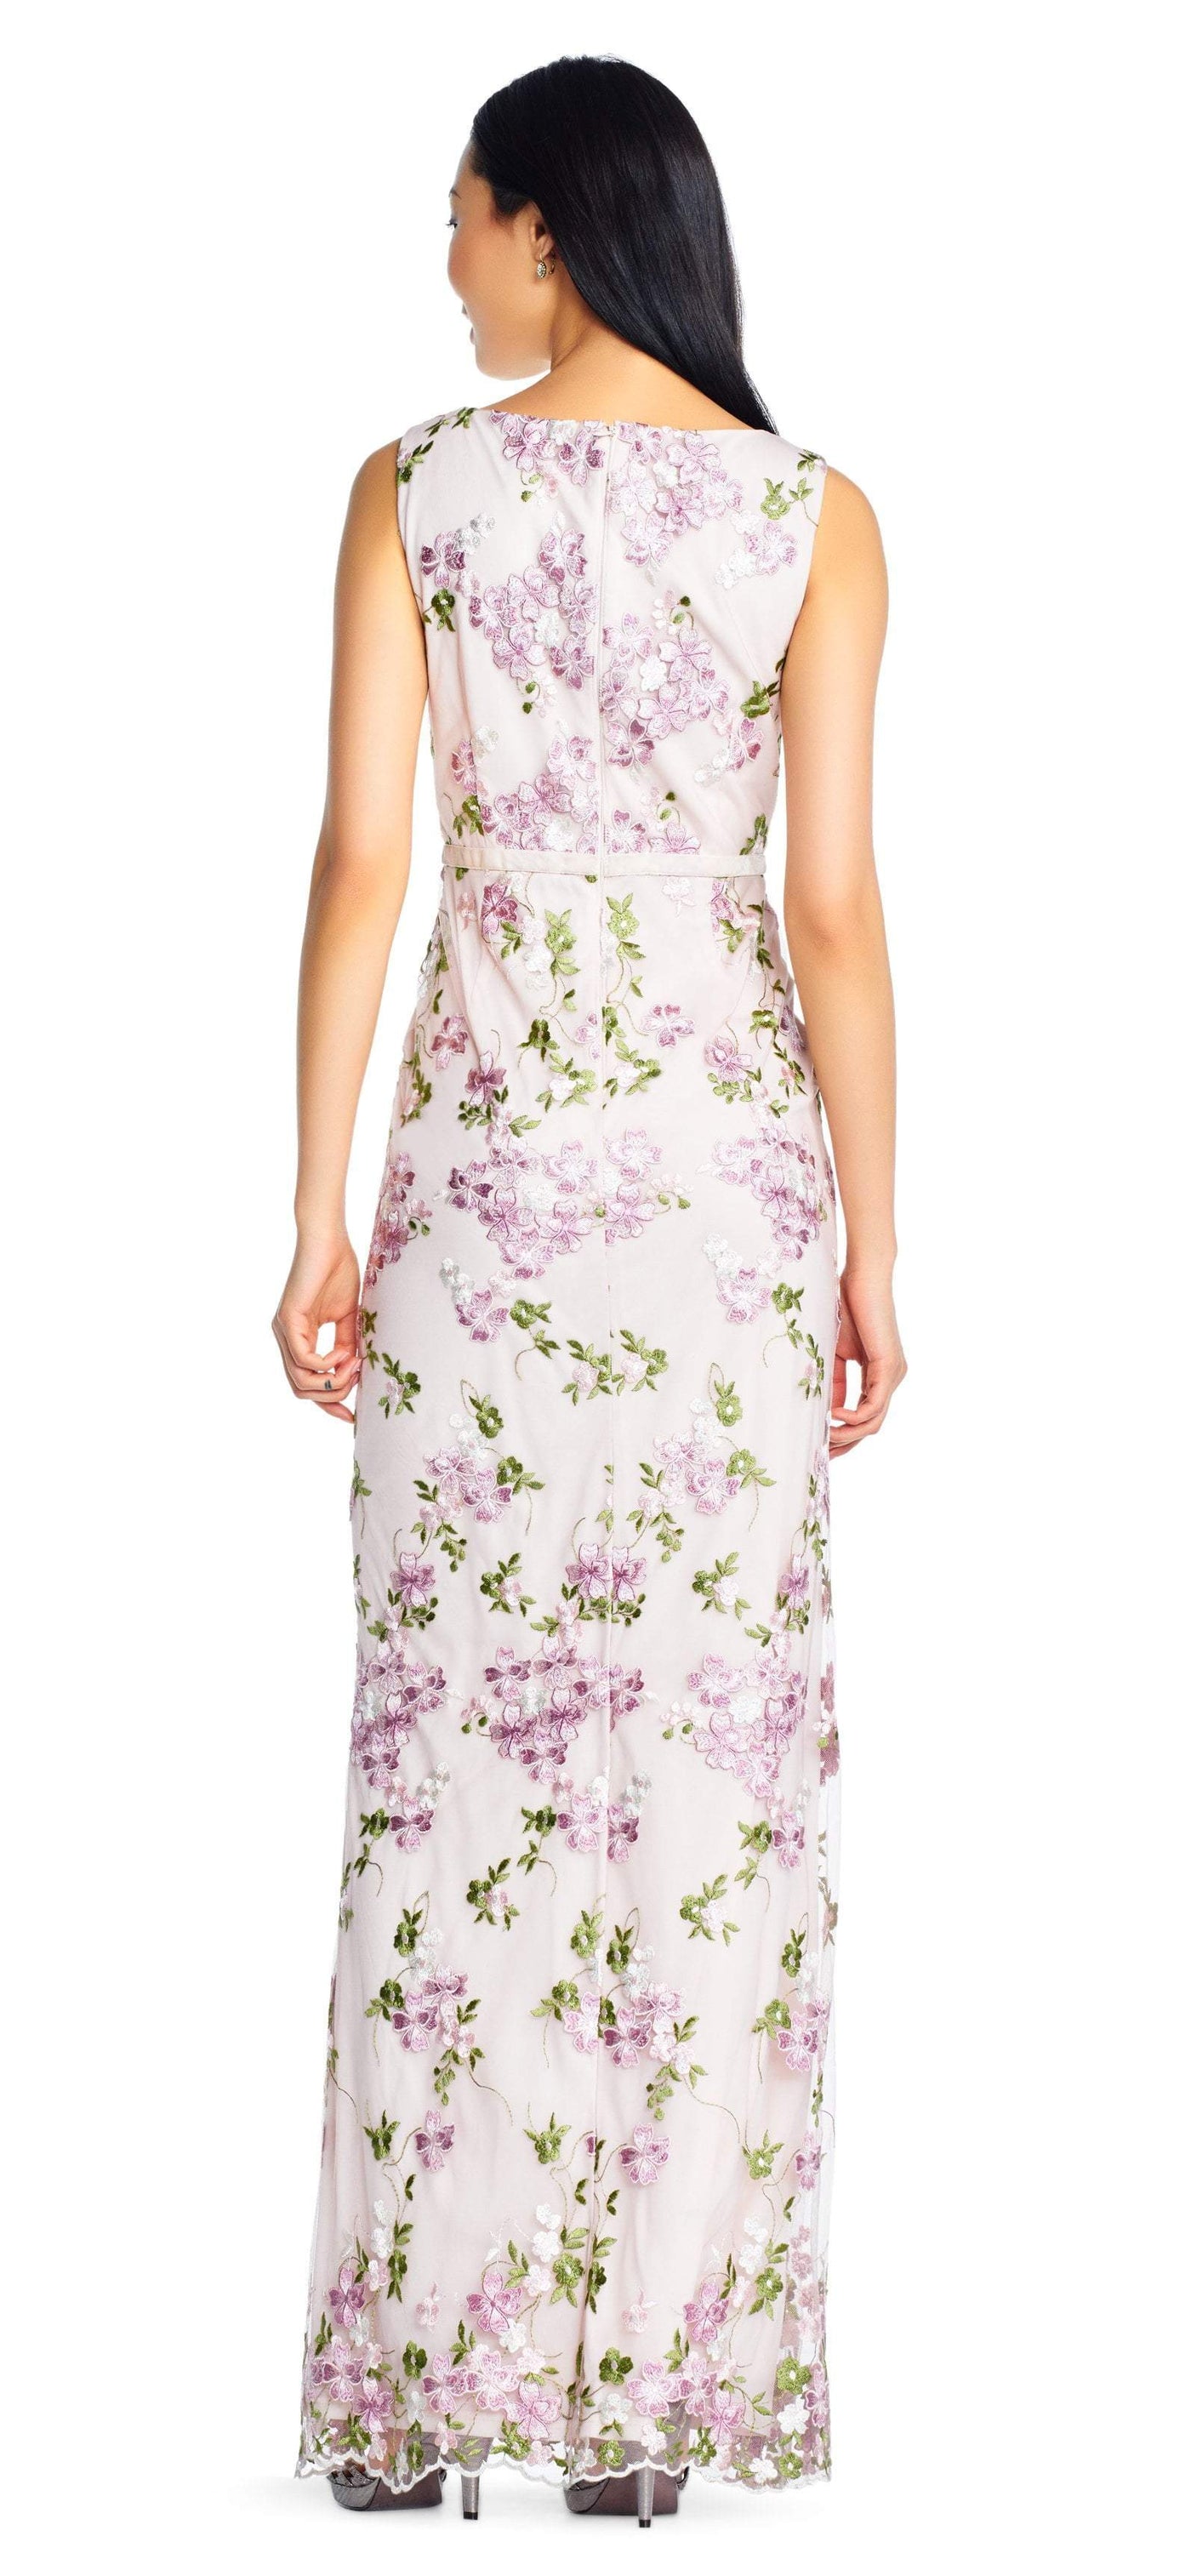 Adrianna Papell - AP1E204015 Floral Embroidered Bateau Sheath Dress In Pink and Multi-Color